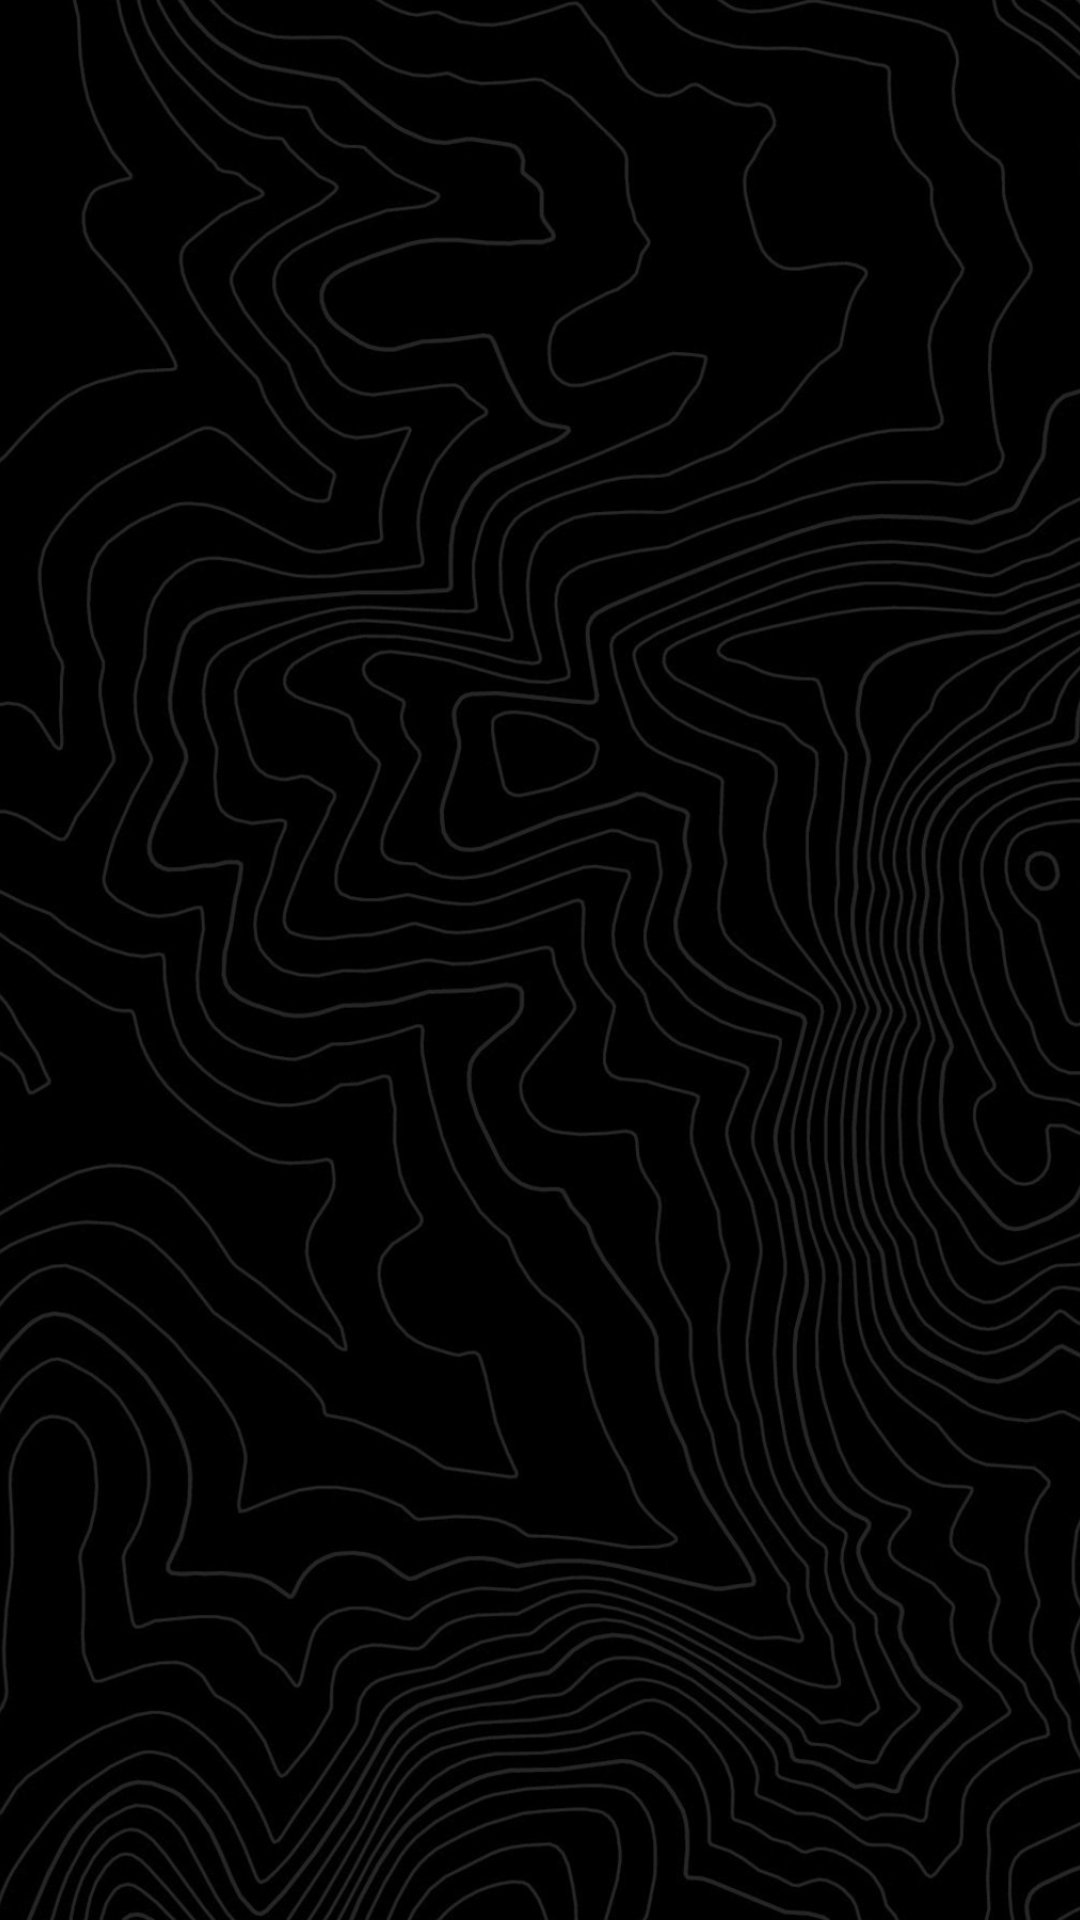 1920X1080 Topography Wallpapers made by me request for different colors  if needed  rwallpaper